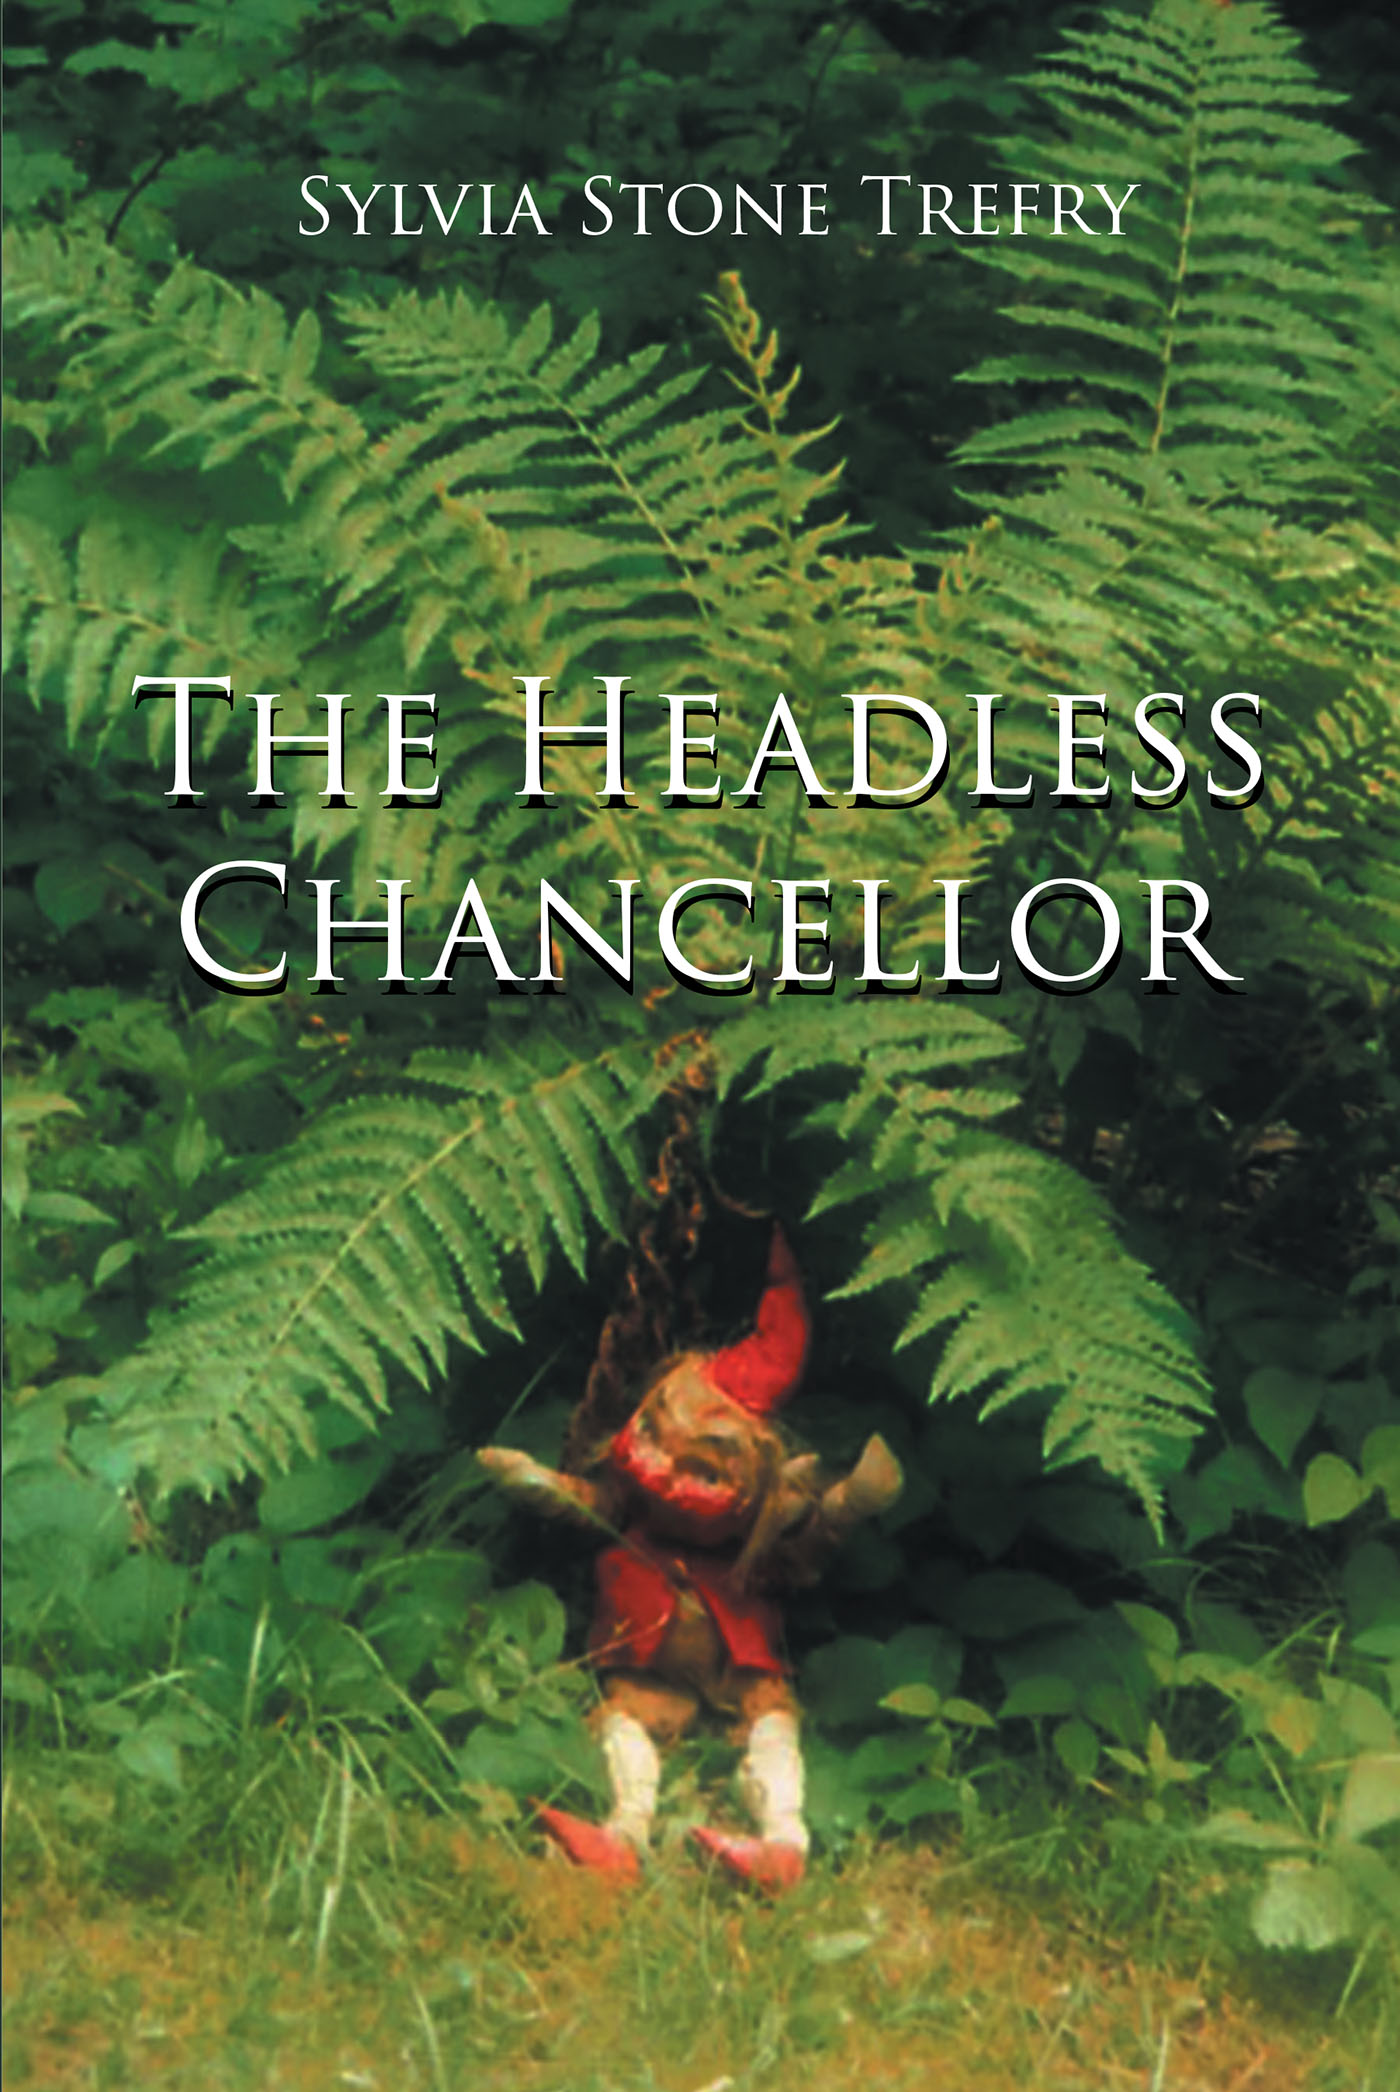 Author Sylvia Stone Trefry’s New Book, "The Headless Chancellor," is a Fascinating Mystery That Brings to Life Legends of the Past from the North Shore Area of Boston